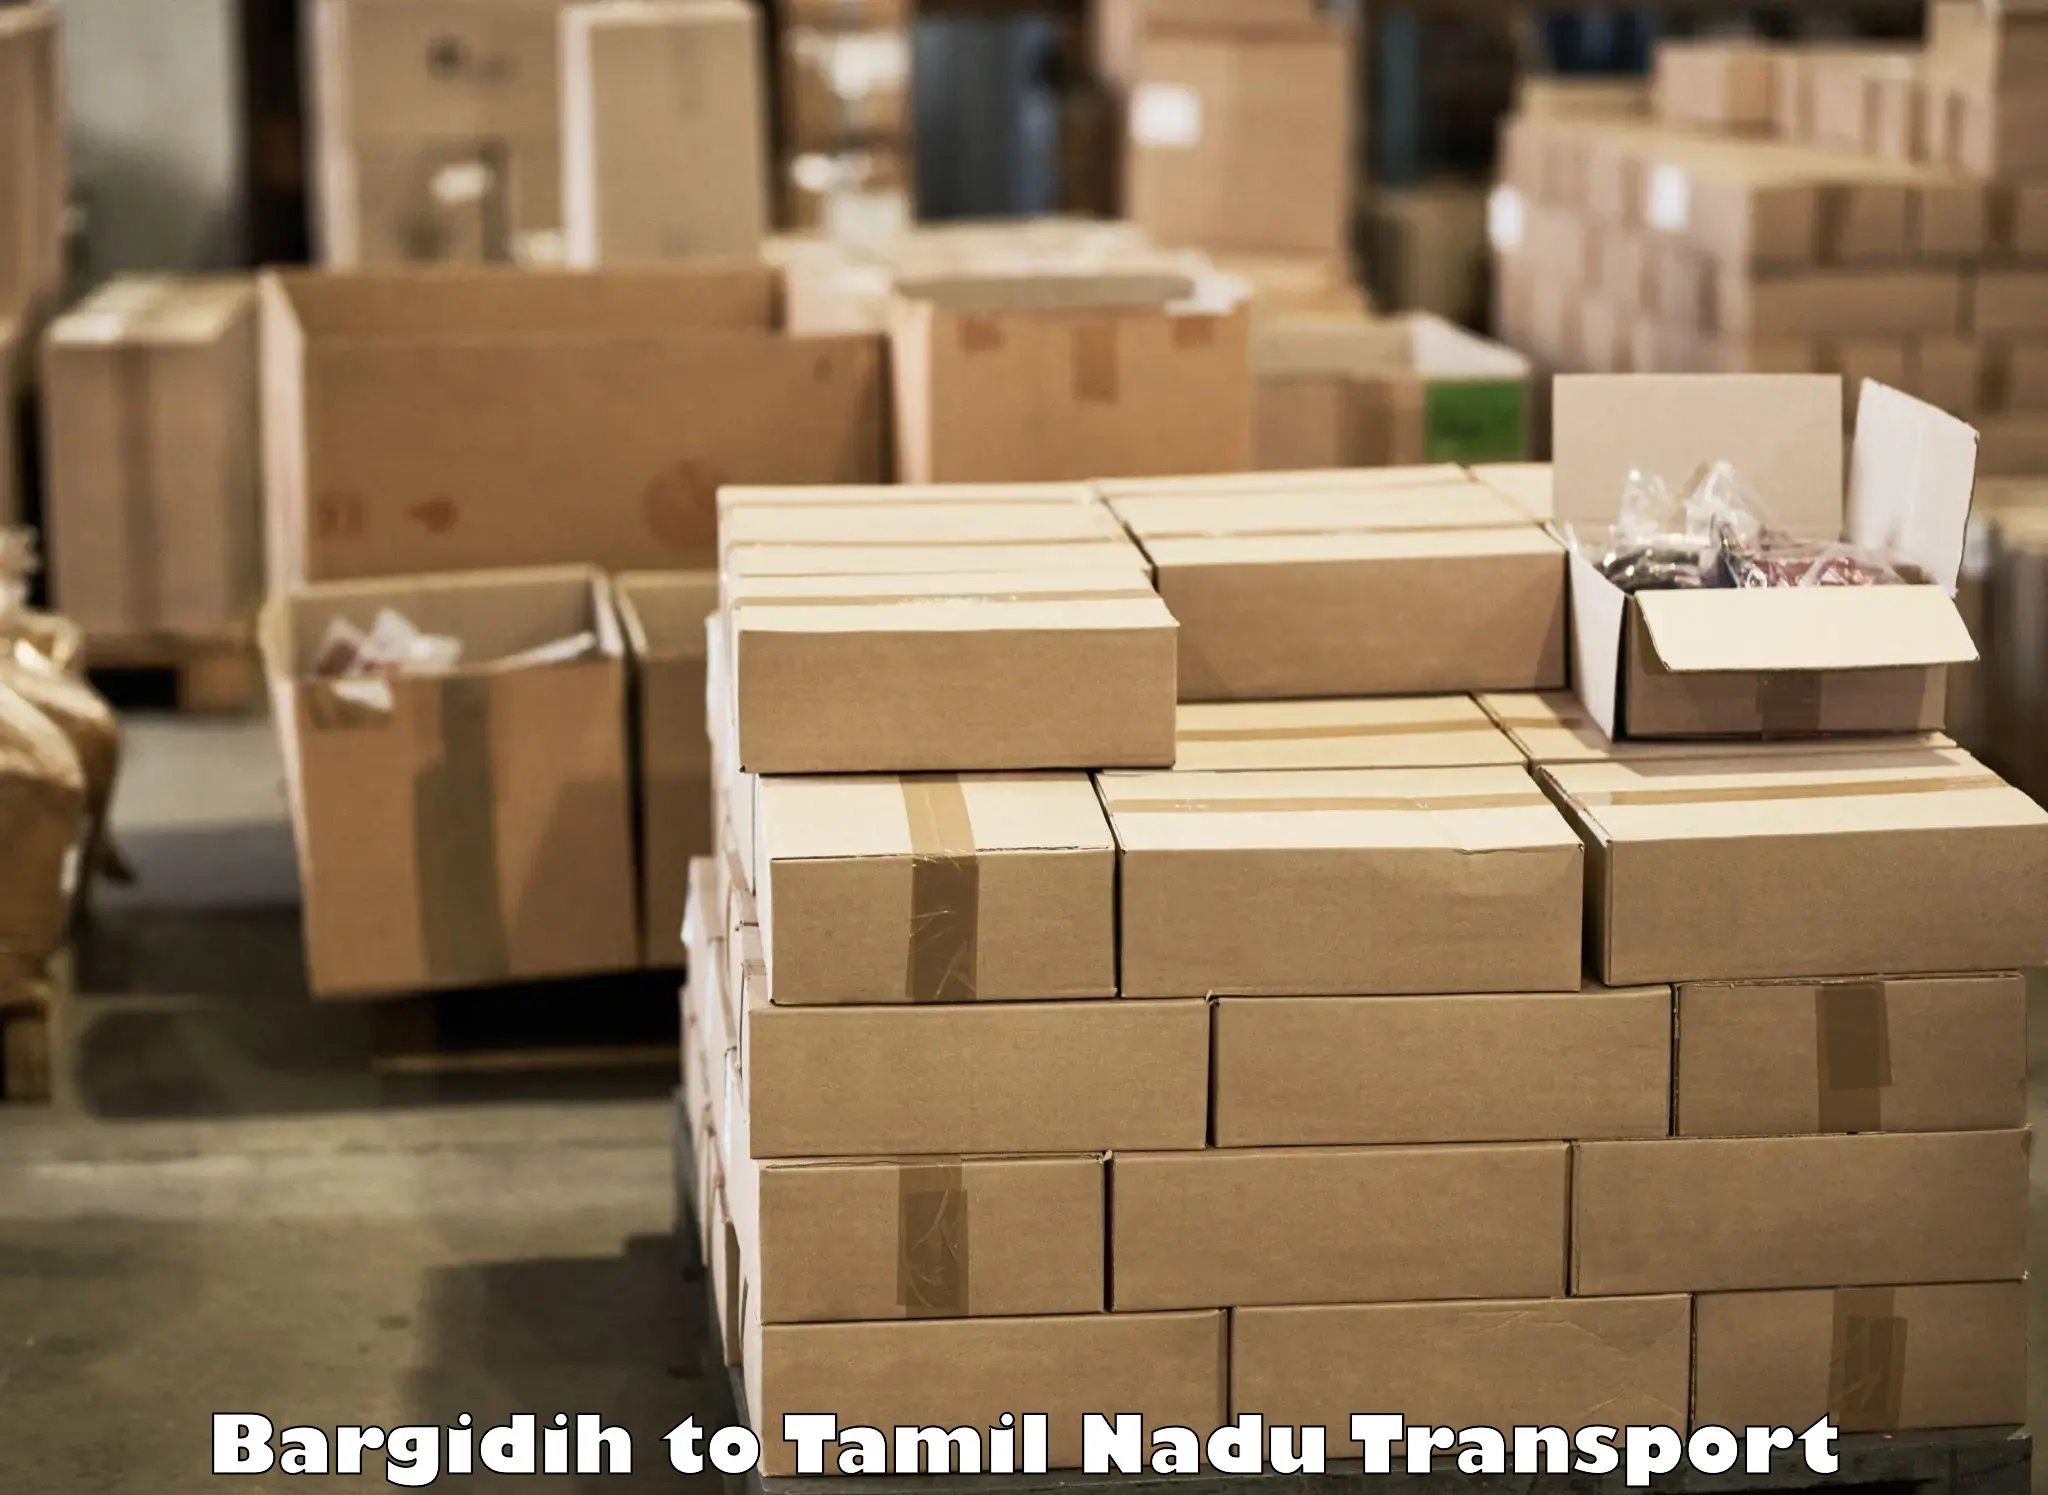 Bike shipping service Bargidih to Karunya Institute of Technology and Sciences Coimbatore